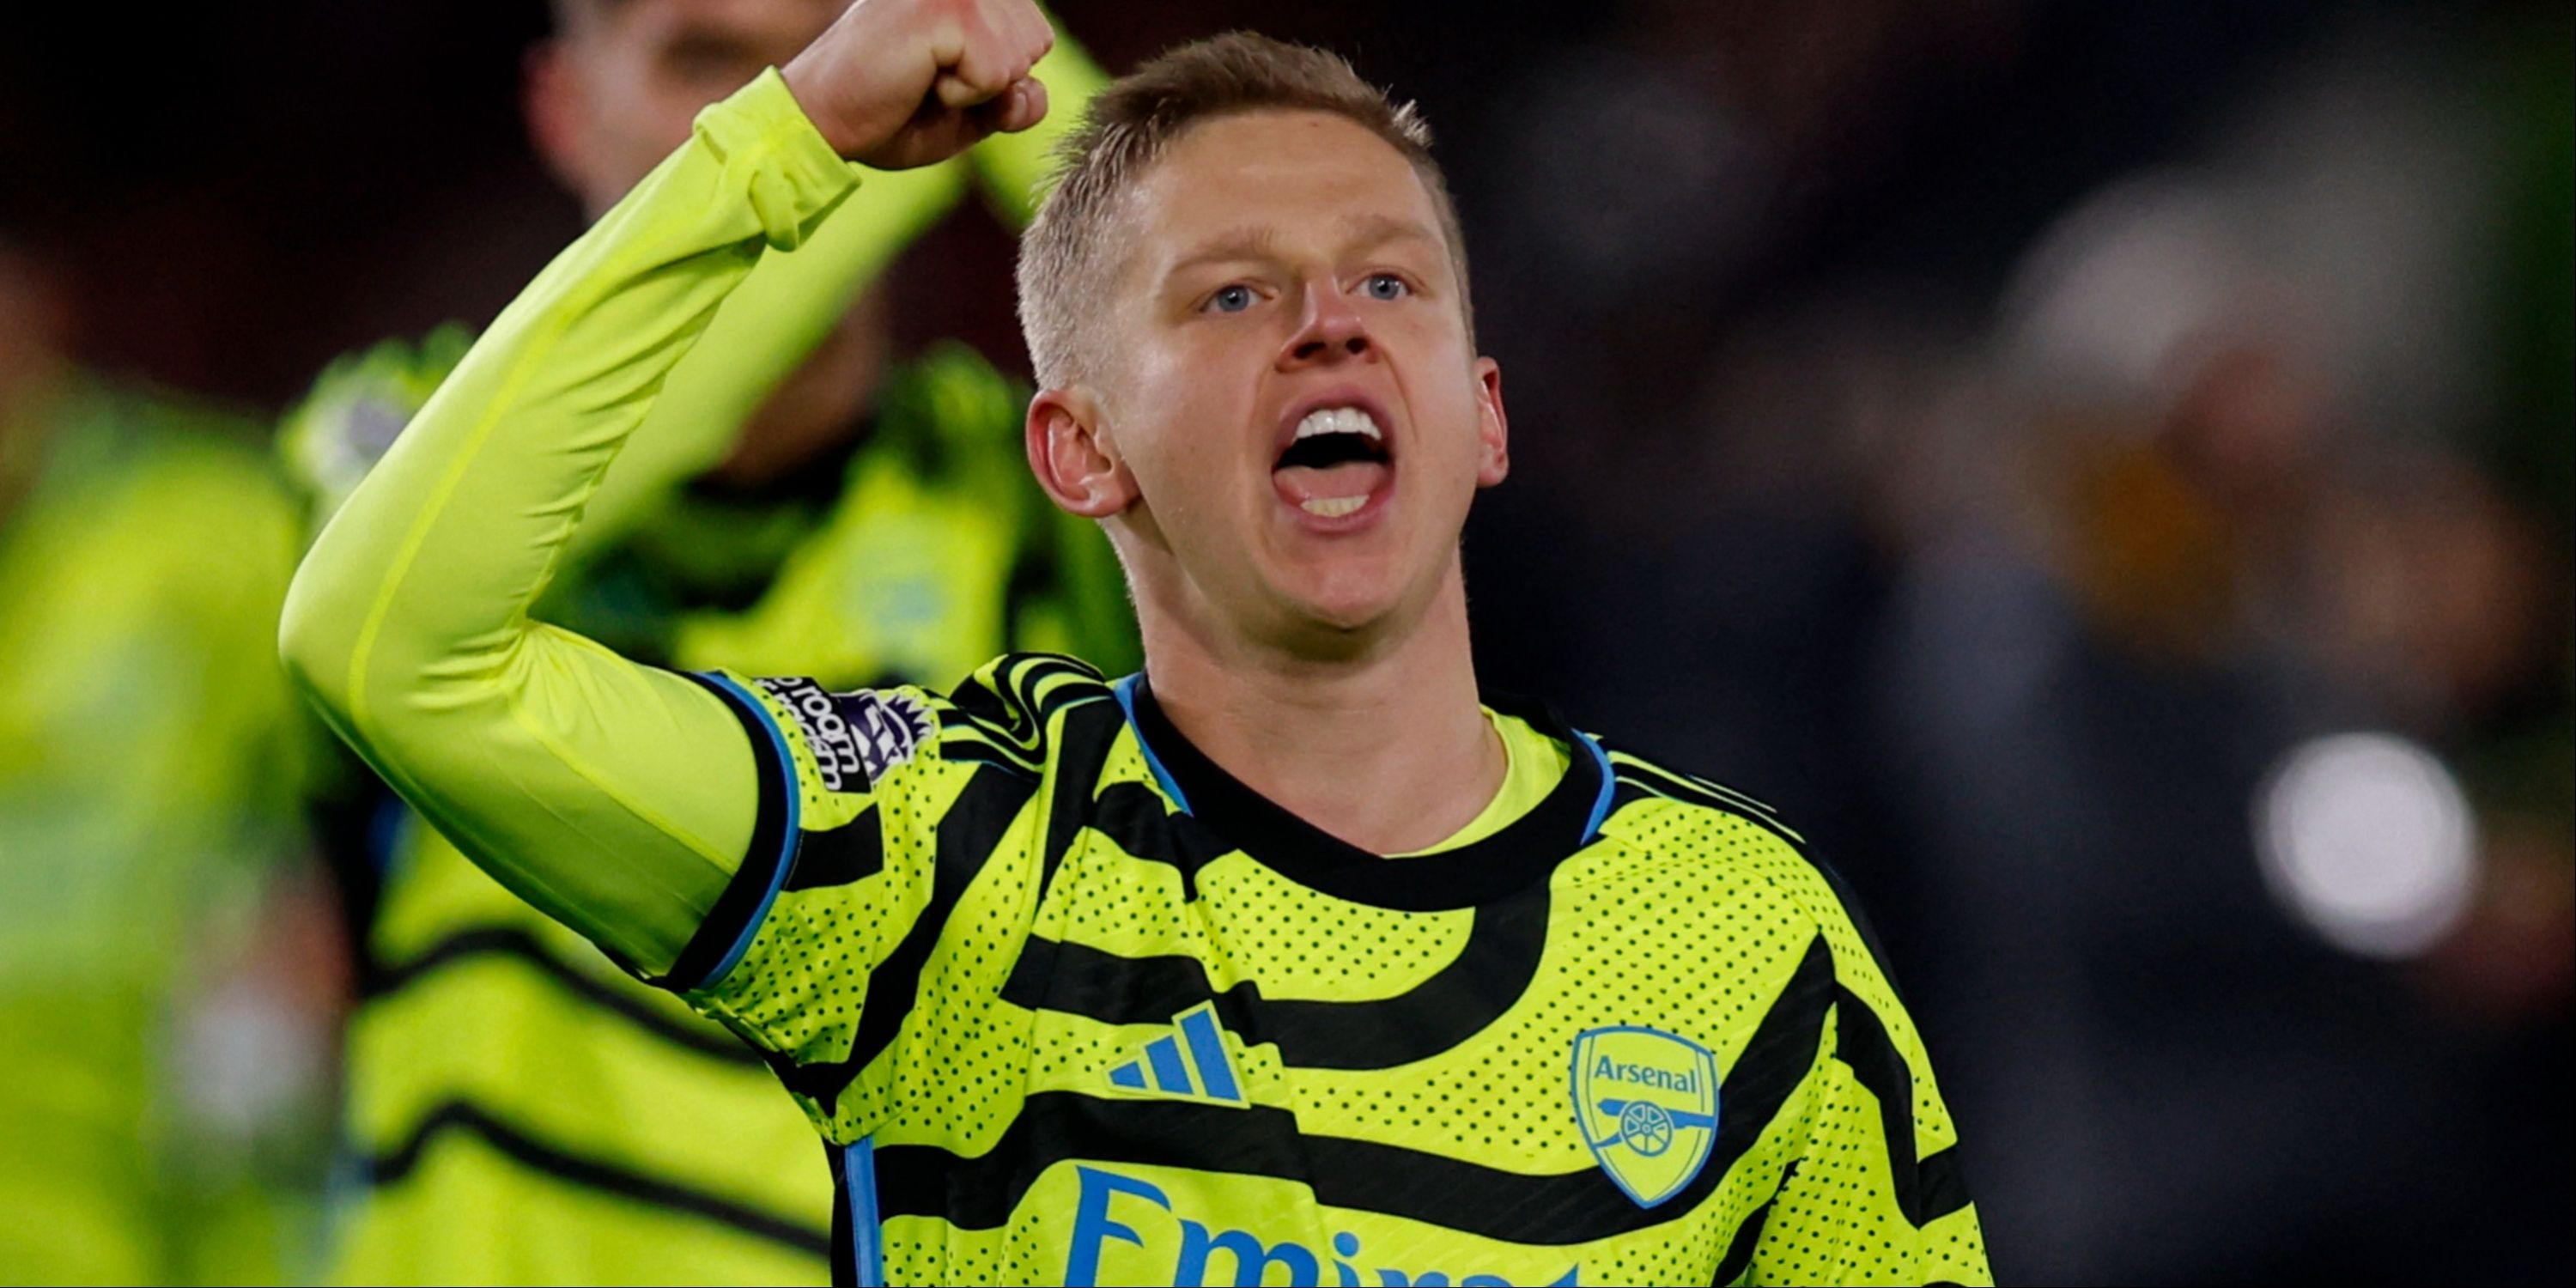 arsenal have already sold zinchenko's replacement for just £10m